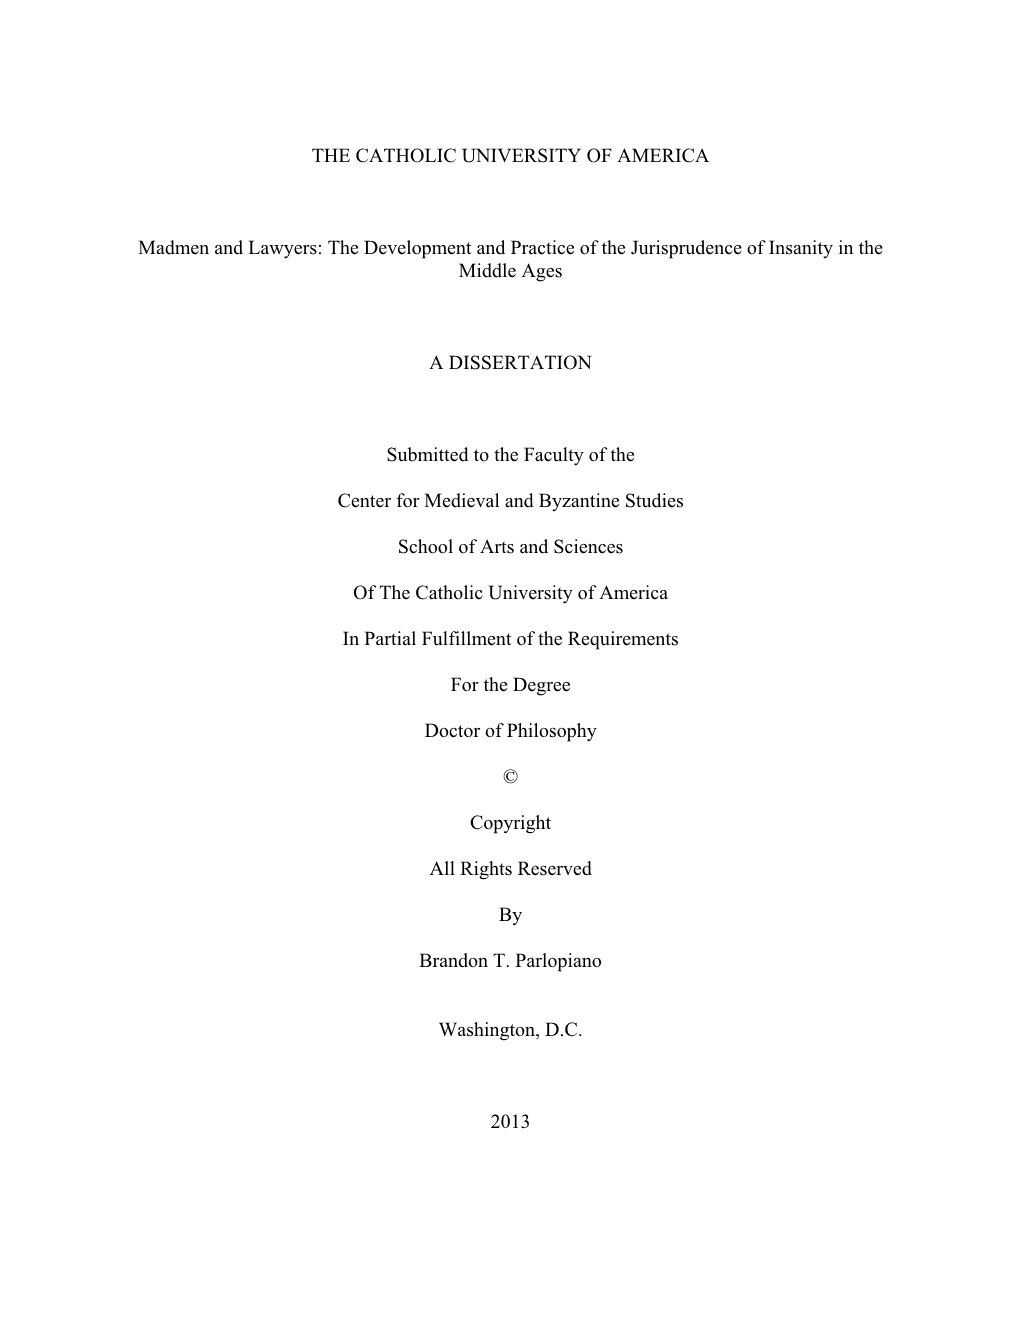 THE CATHOLIC UNIVERSITY of AMERICA Madmen and Lawyers: the Development and Practice of the Jurisprudence of Insanity in the Midd